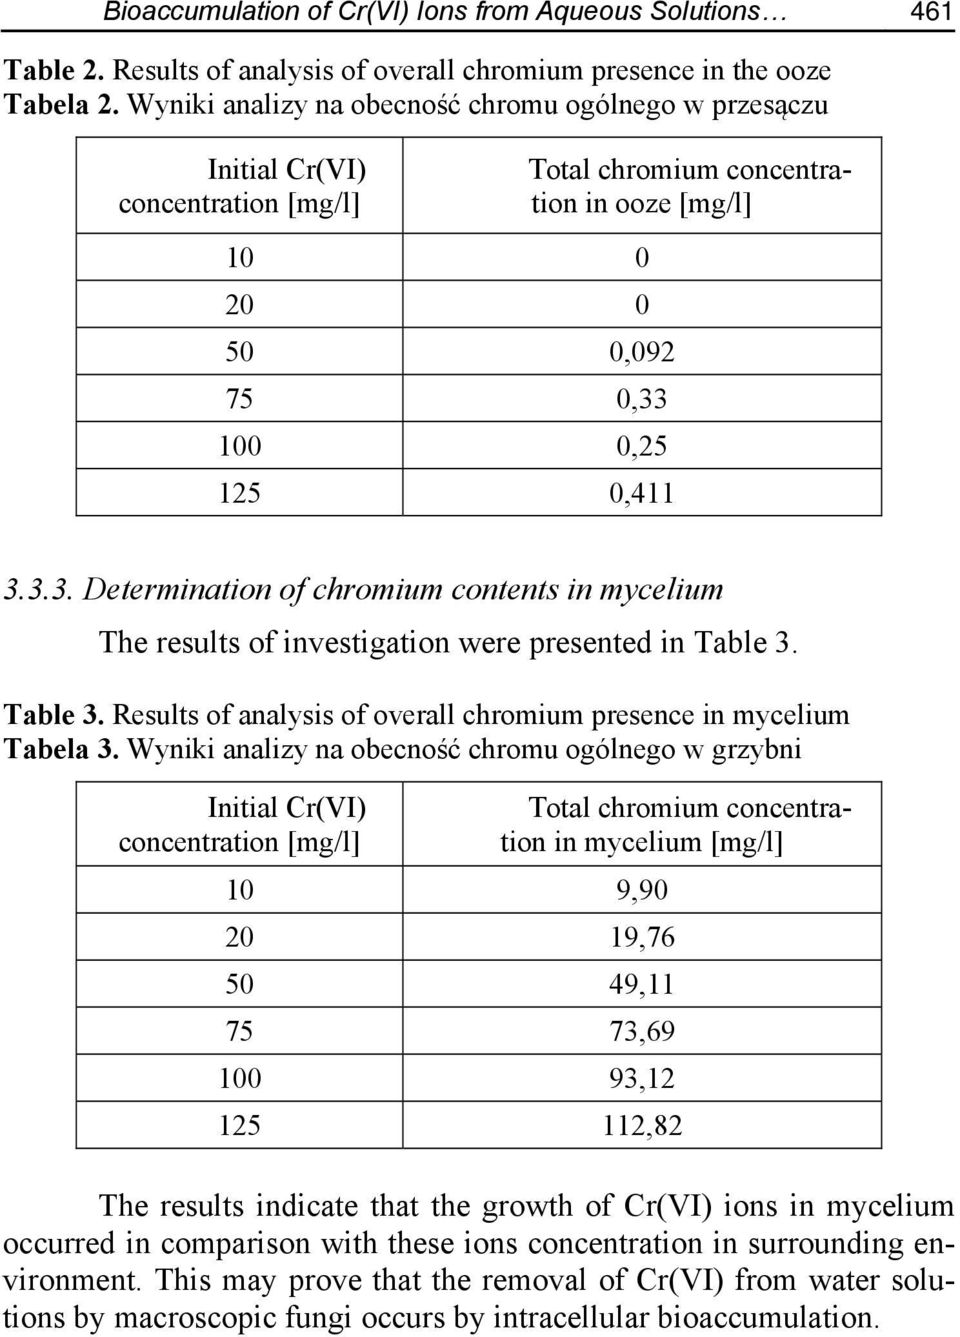 1,25 125,411 Total chromium concentration in ooze [mg/l] 3.3.3. Determination of chromium contents in mycelium The results of investigation were presented in Table 3.